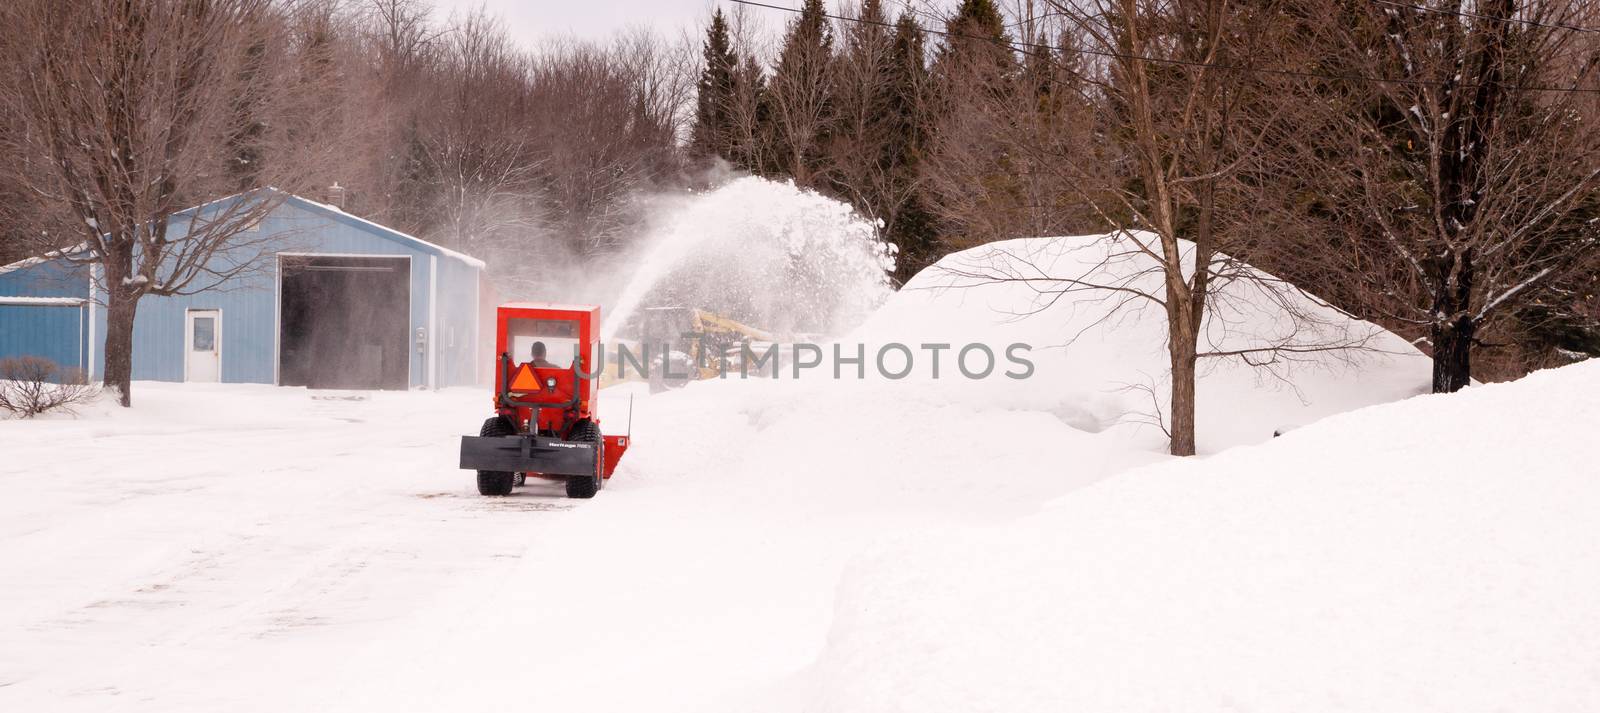 Snowblower Works Fresh Snow Wisconsin Winter by ChrisBoswell